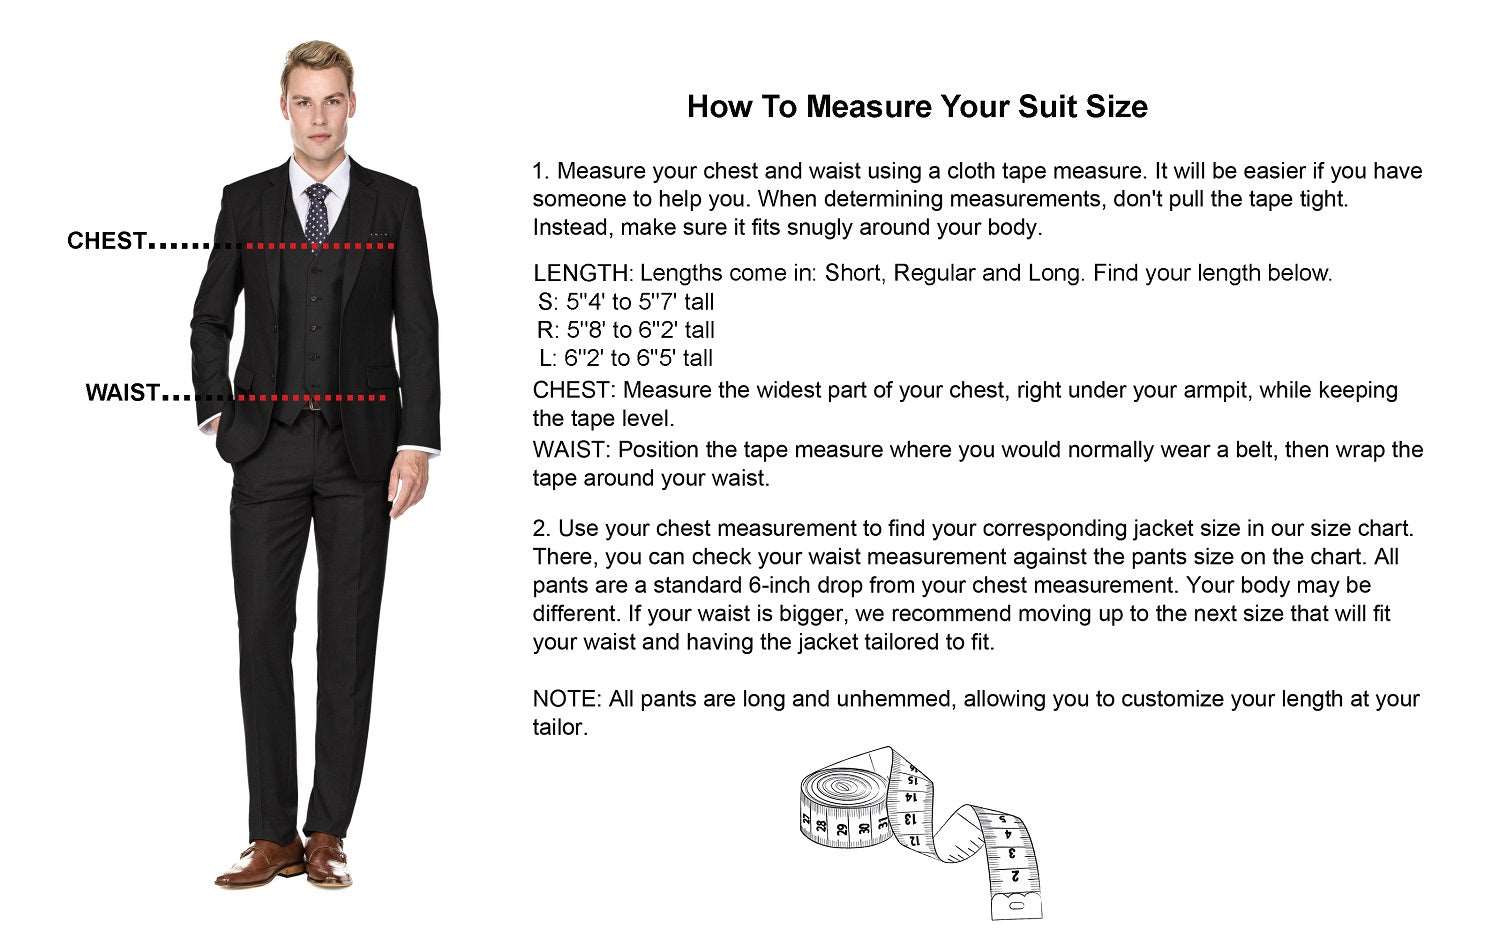 Braveman Men's Classic Fit Ugly Christmas Suits with Matching Tie DAILYHAUTE